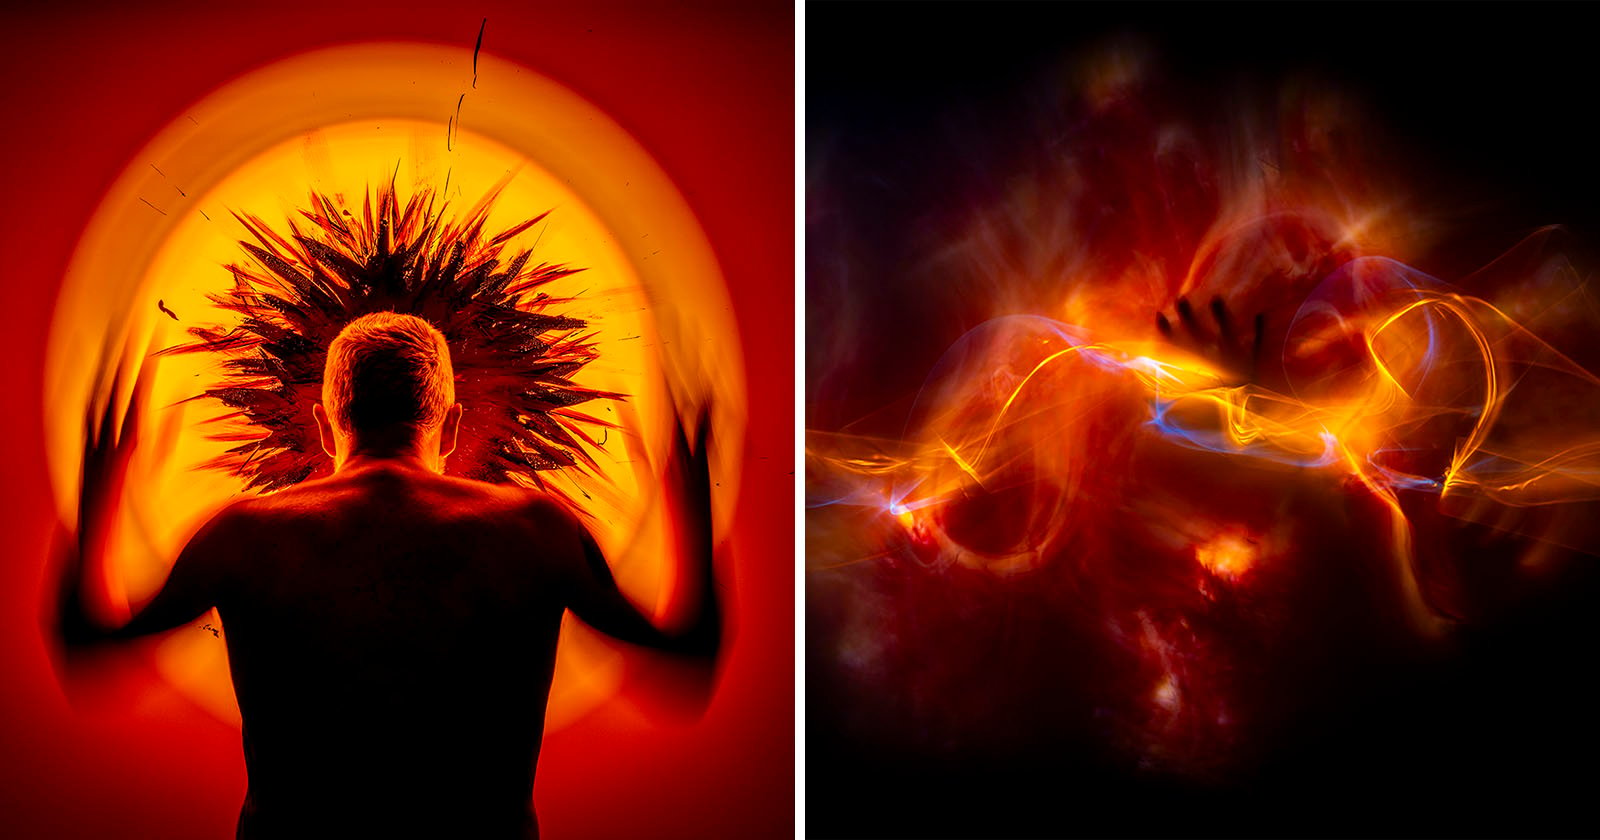 DUALITY Series Showcases Stunning Light Painting and an Artists Growth